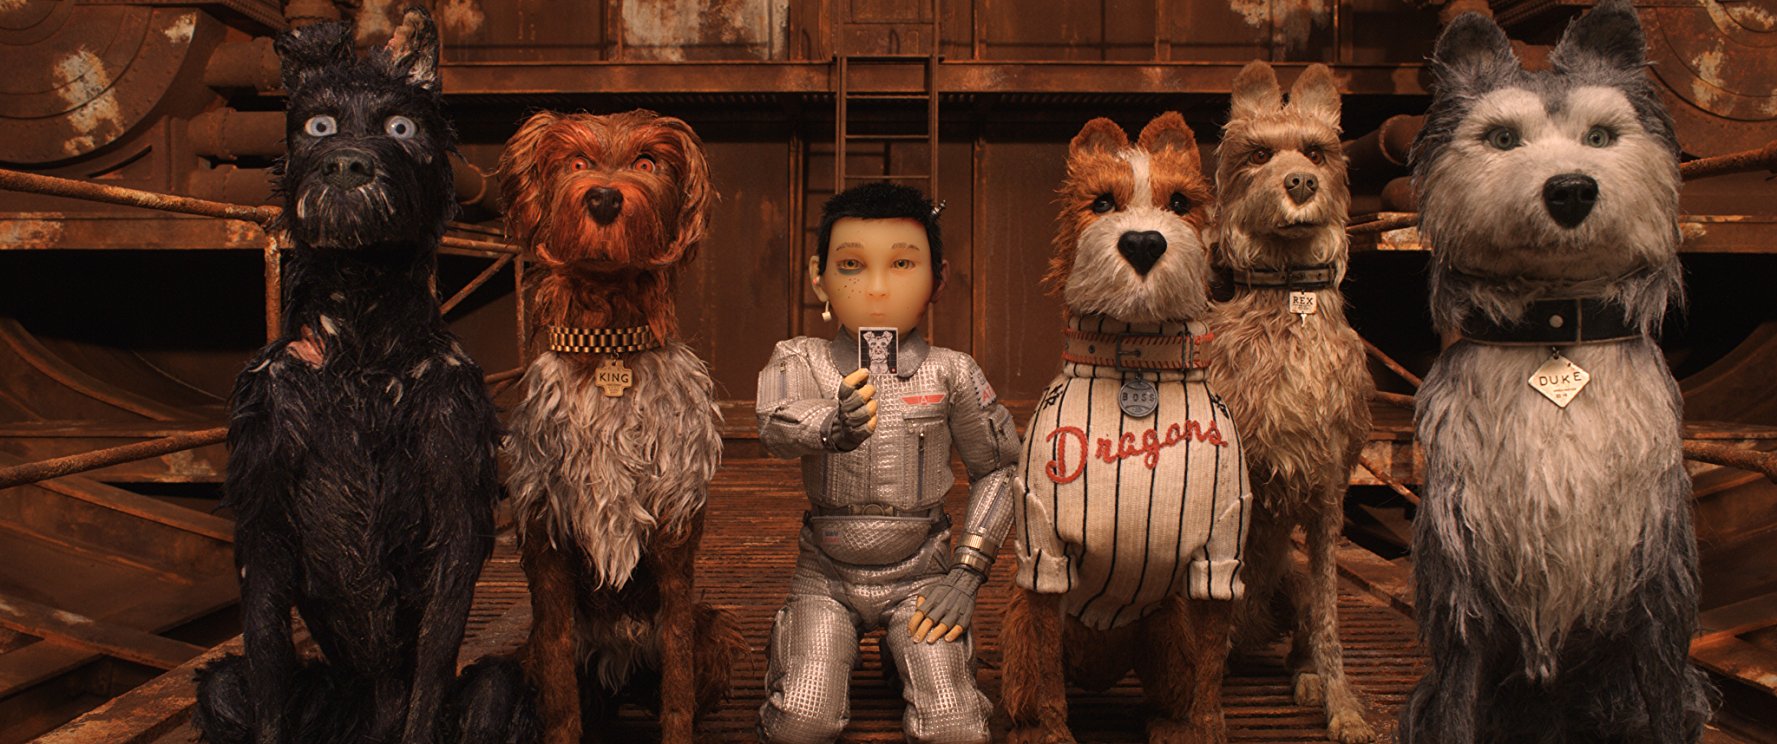 19 Photos From The Isle Of Dogs Exhibit That Scream “The Most Beautiful Movie Ever”